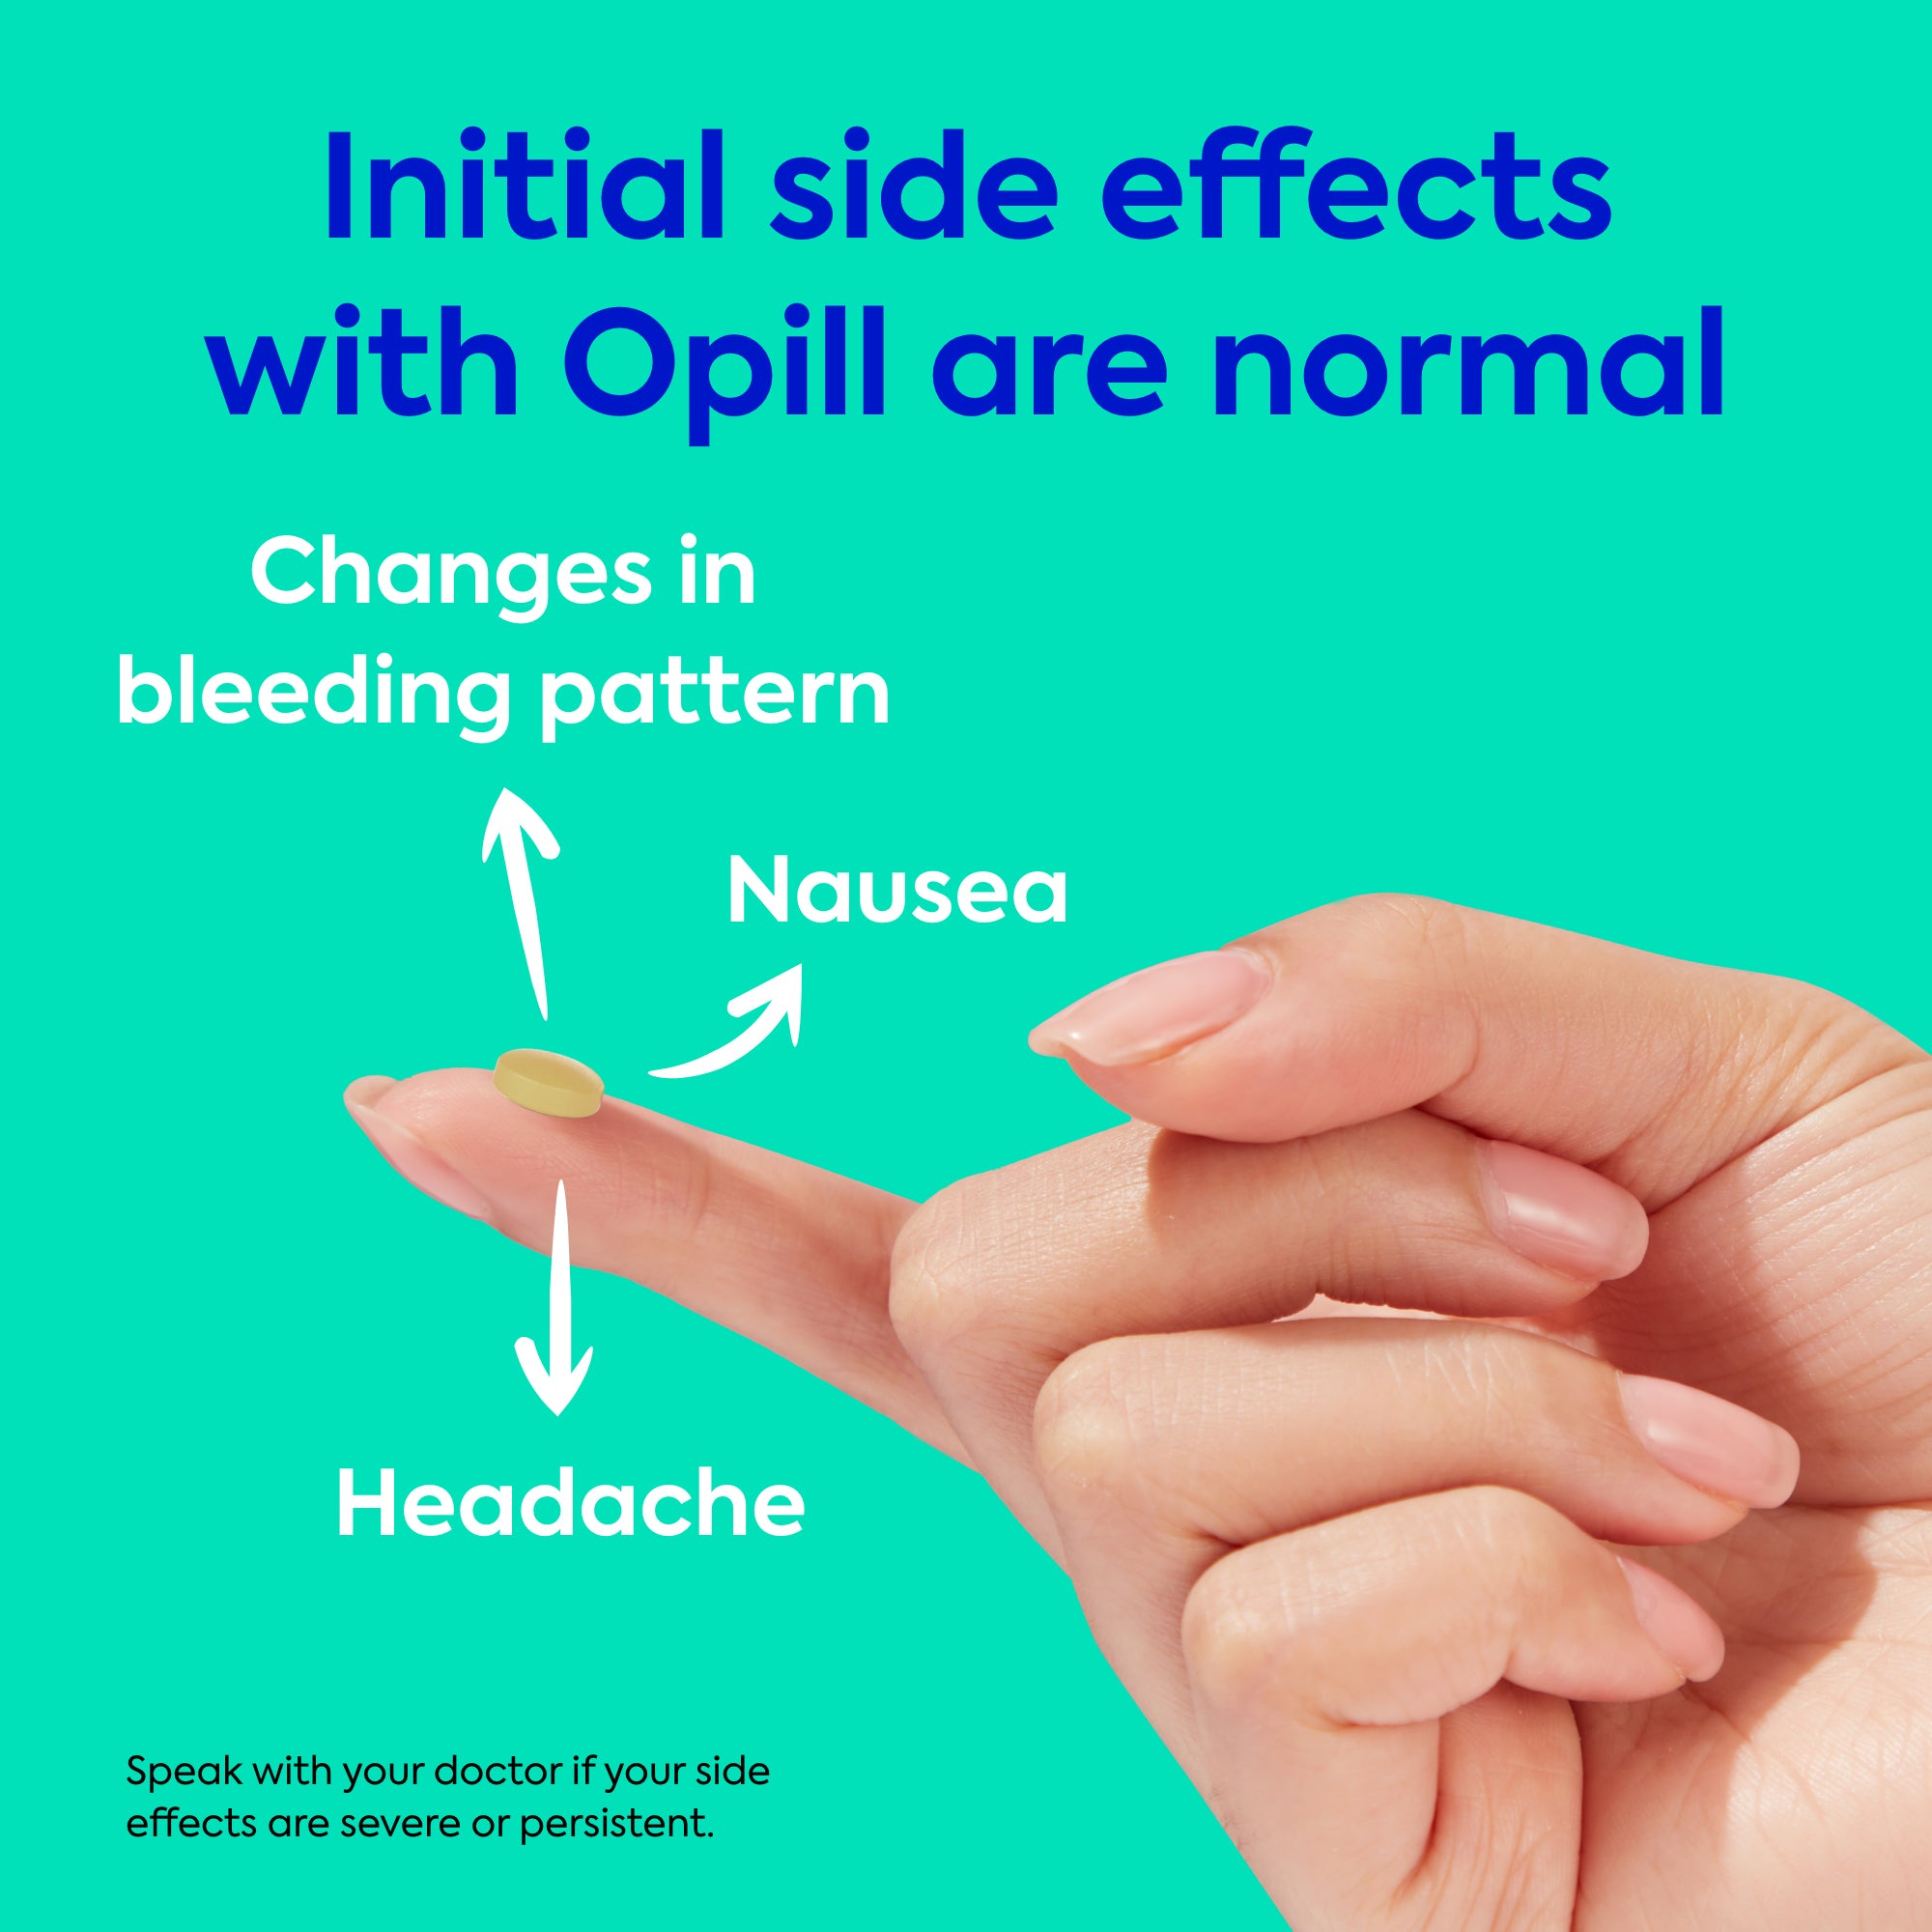 Initial side effects with Opill® are normal. Speak with your doctor if your side effects are severe or persistent.